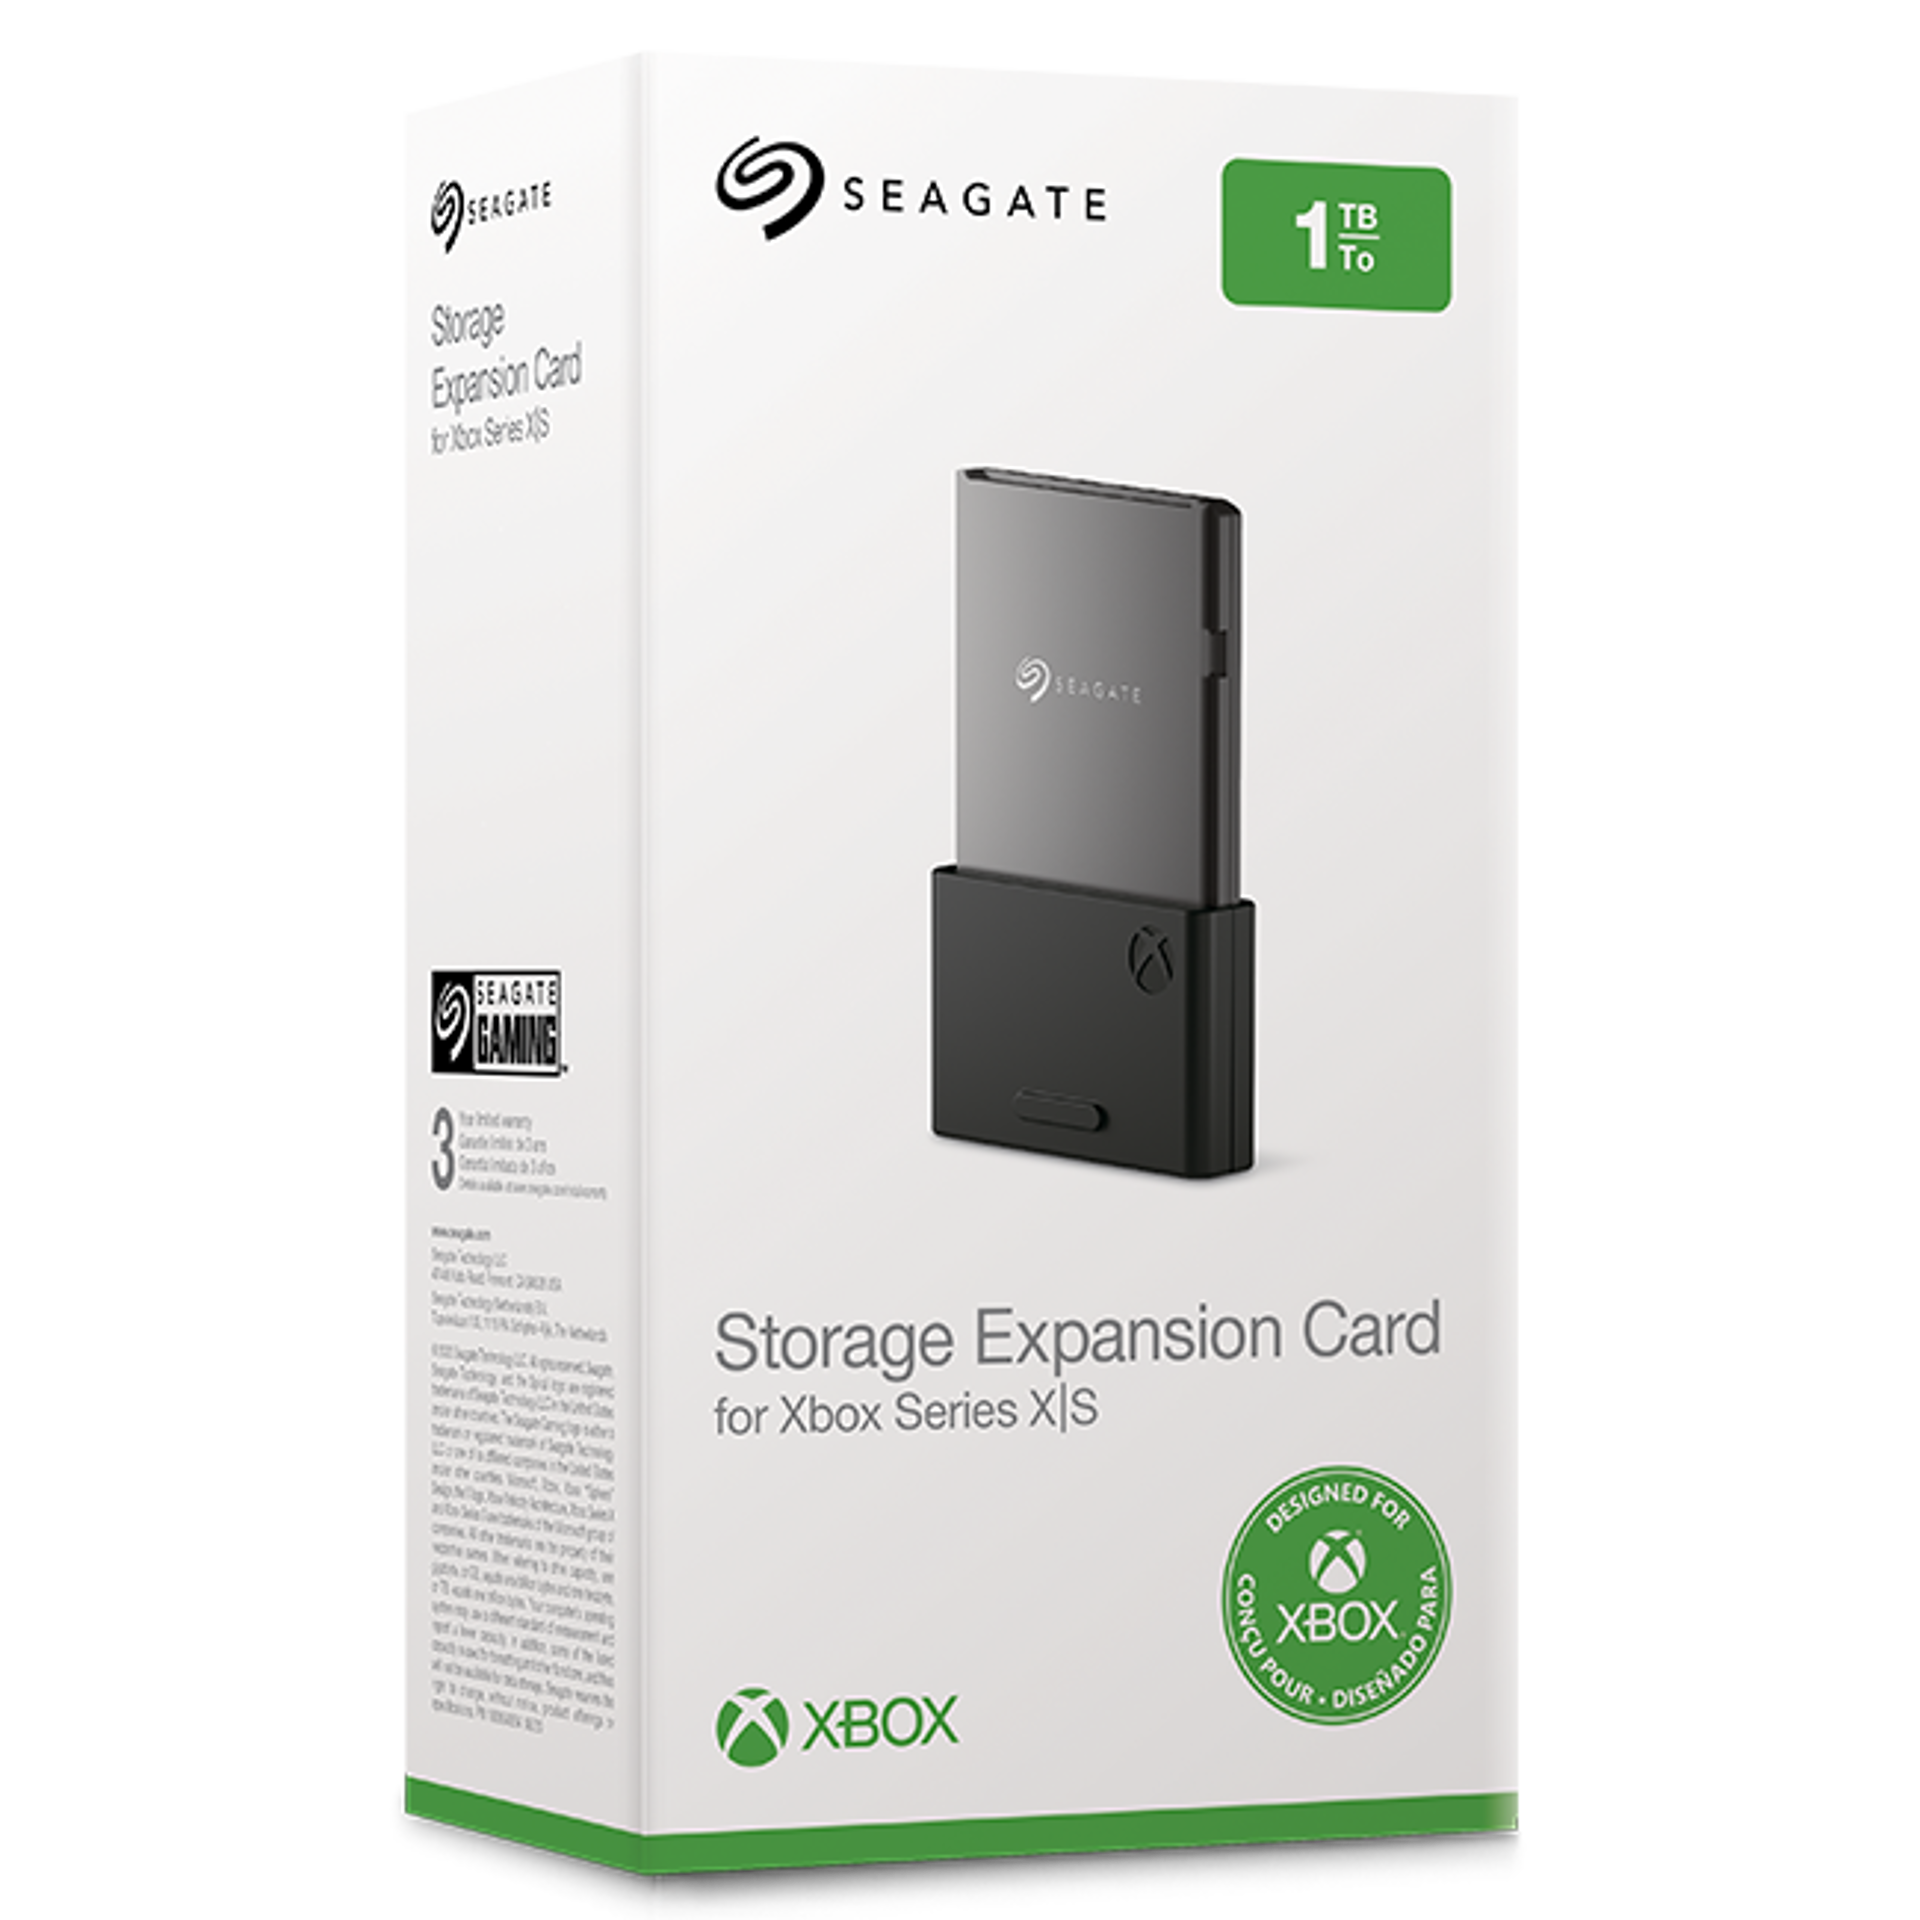 Seagate 1TB Storage Expansion Card for Xbox Series X | S